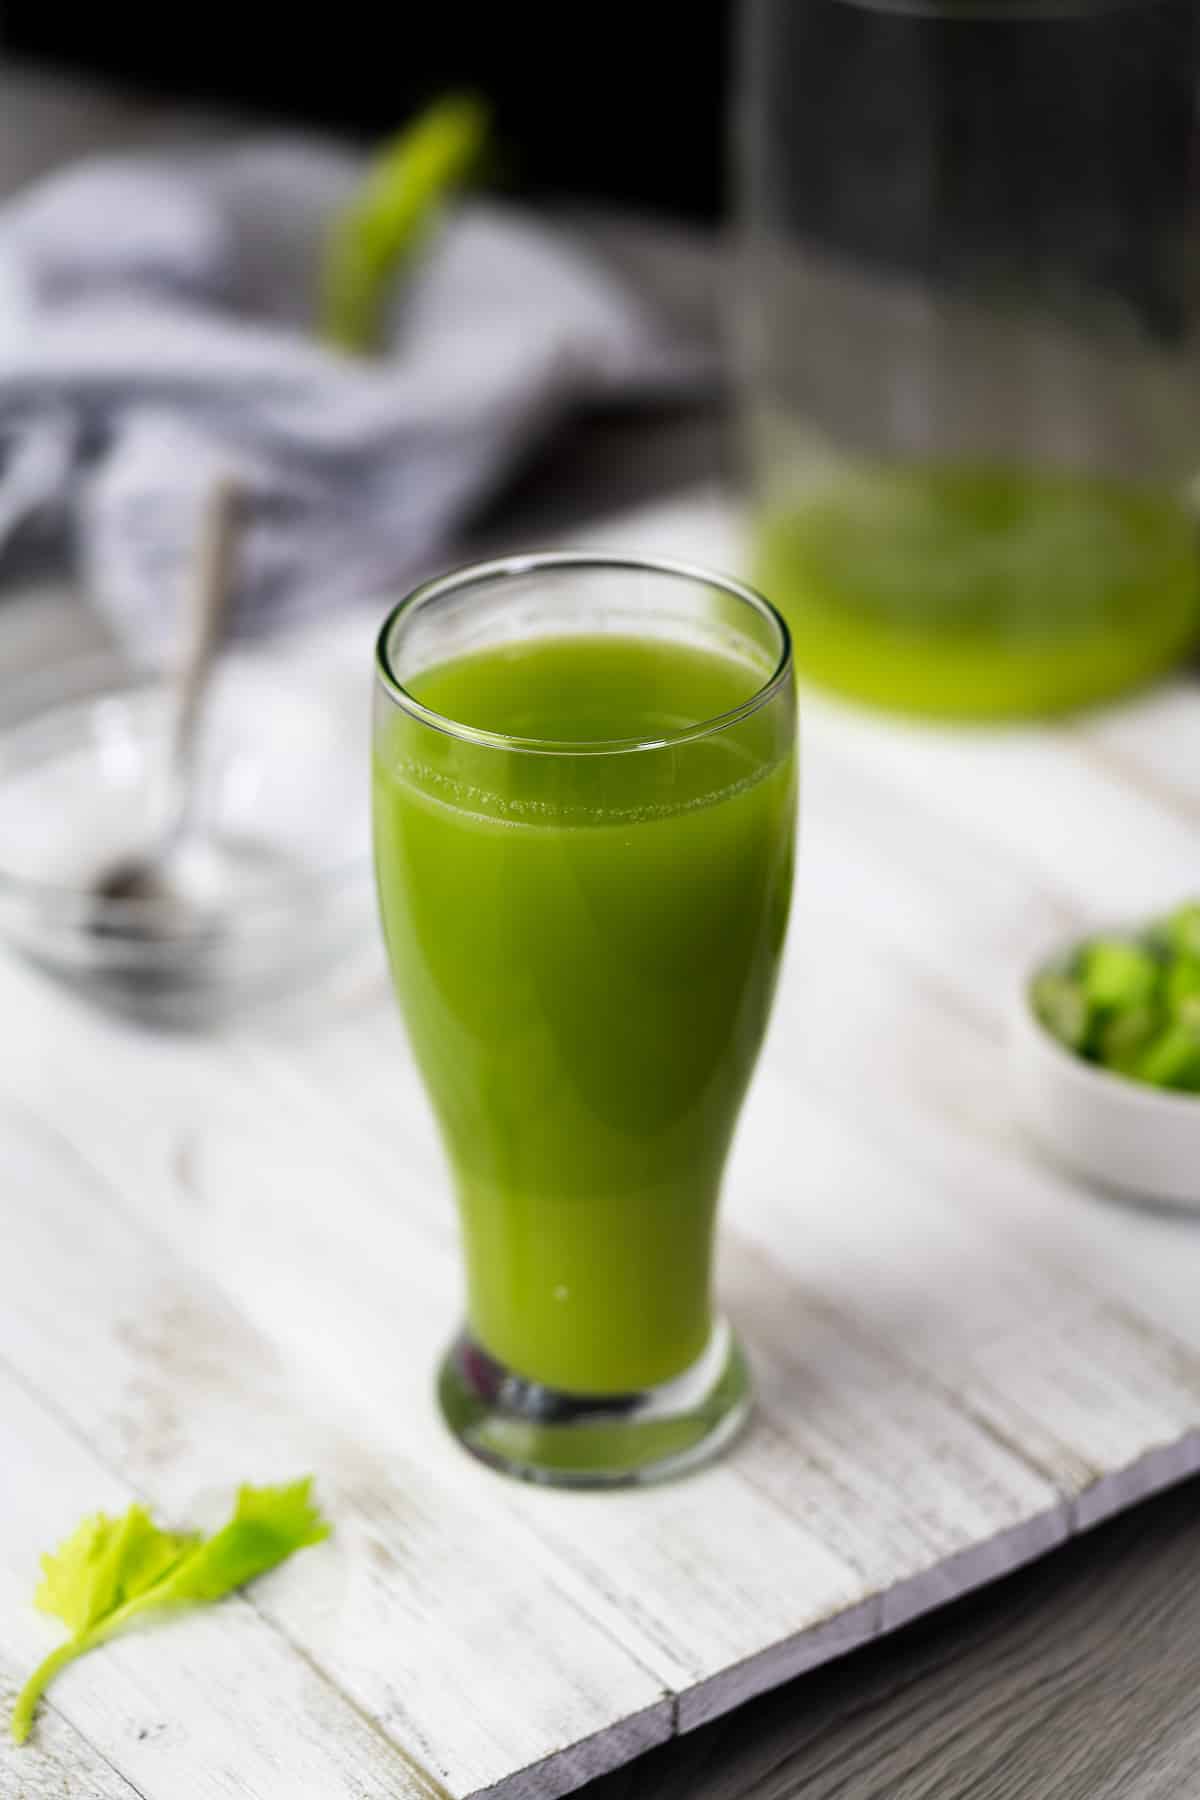 Celery Juice served in a glass with chopped celery in a bowl.